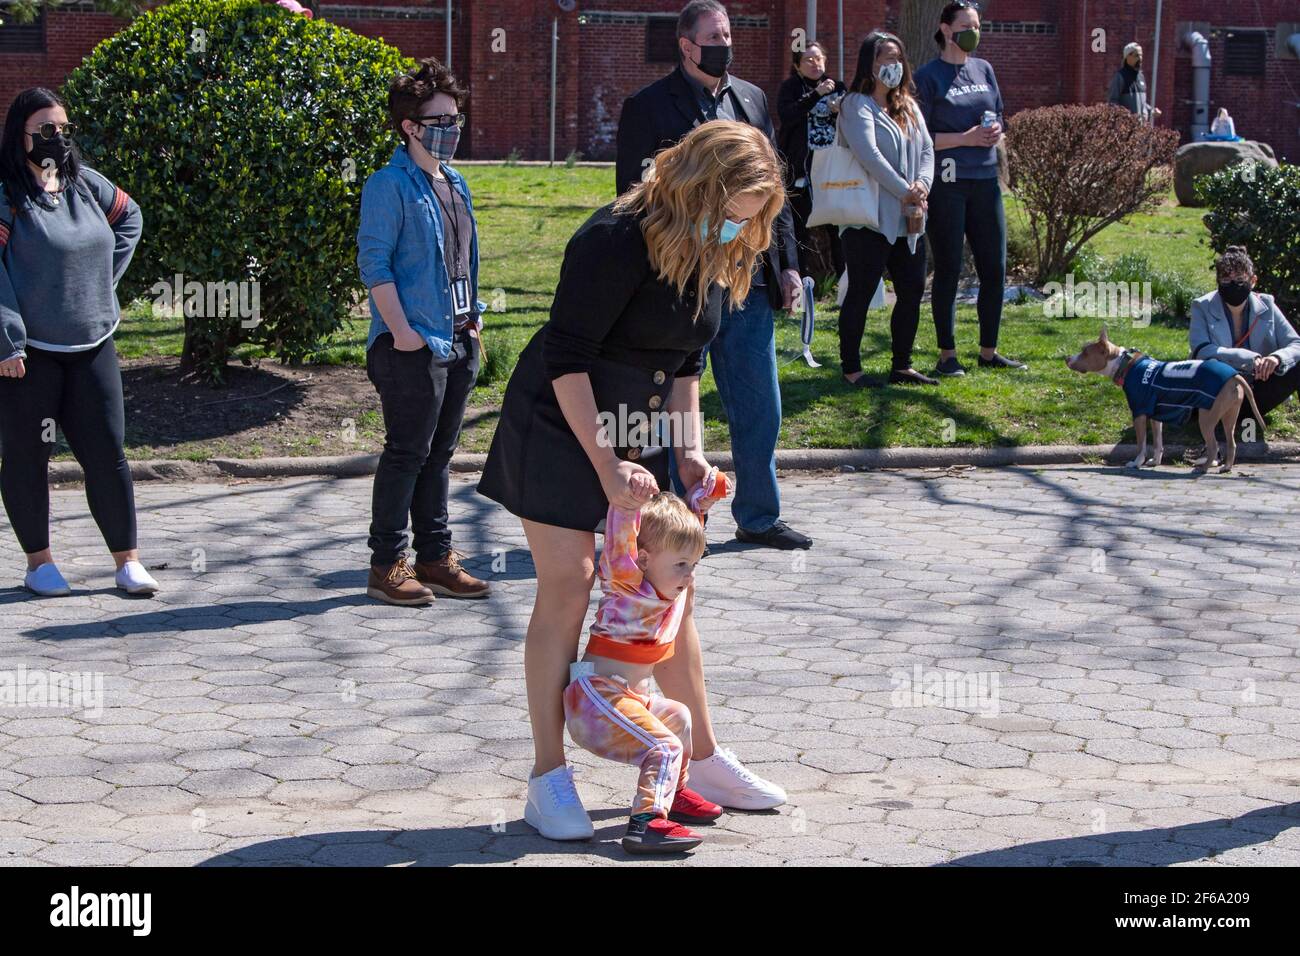 NEW YORK, NY - MARCH 30: Amy Schumer and son Gene Fischer in Astoria Park on March 30, 2021 in Queens Borough of New York City. Credit: Ron Adar/Alamy Live News Stock Photo